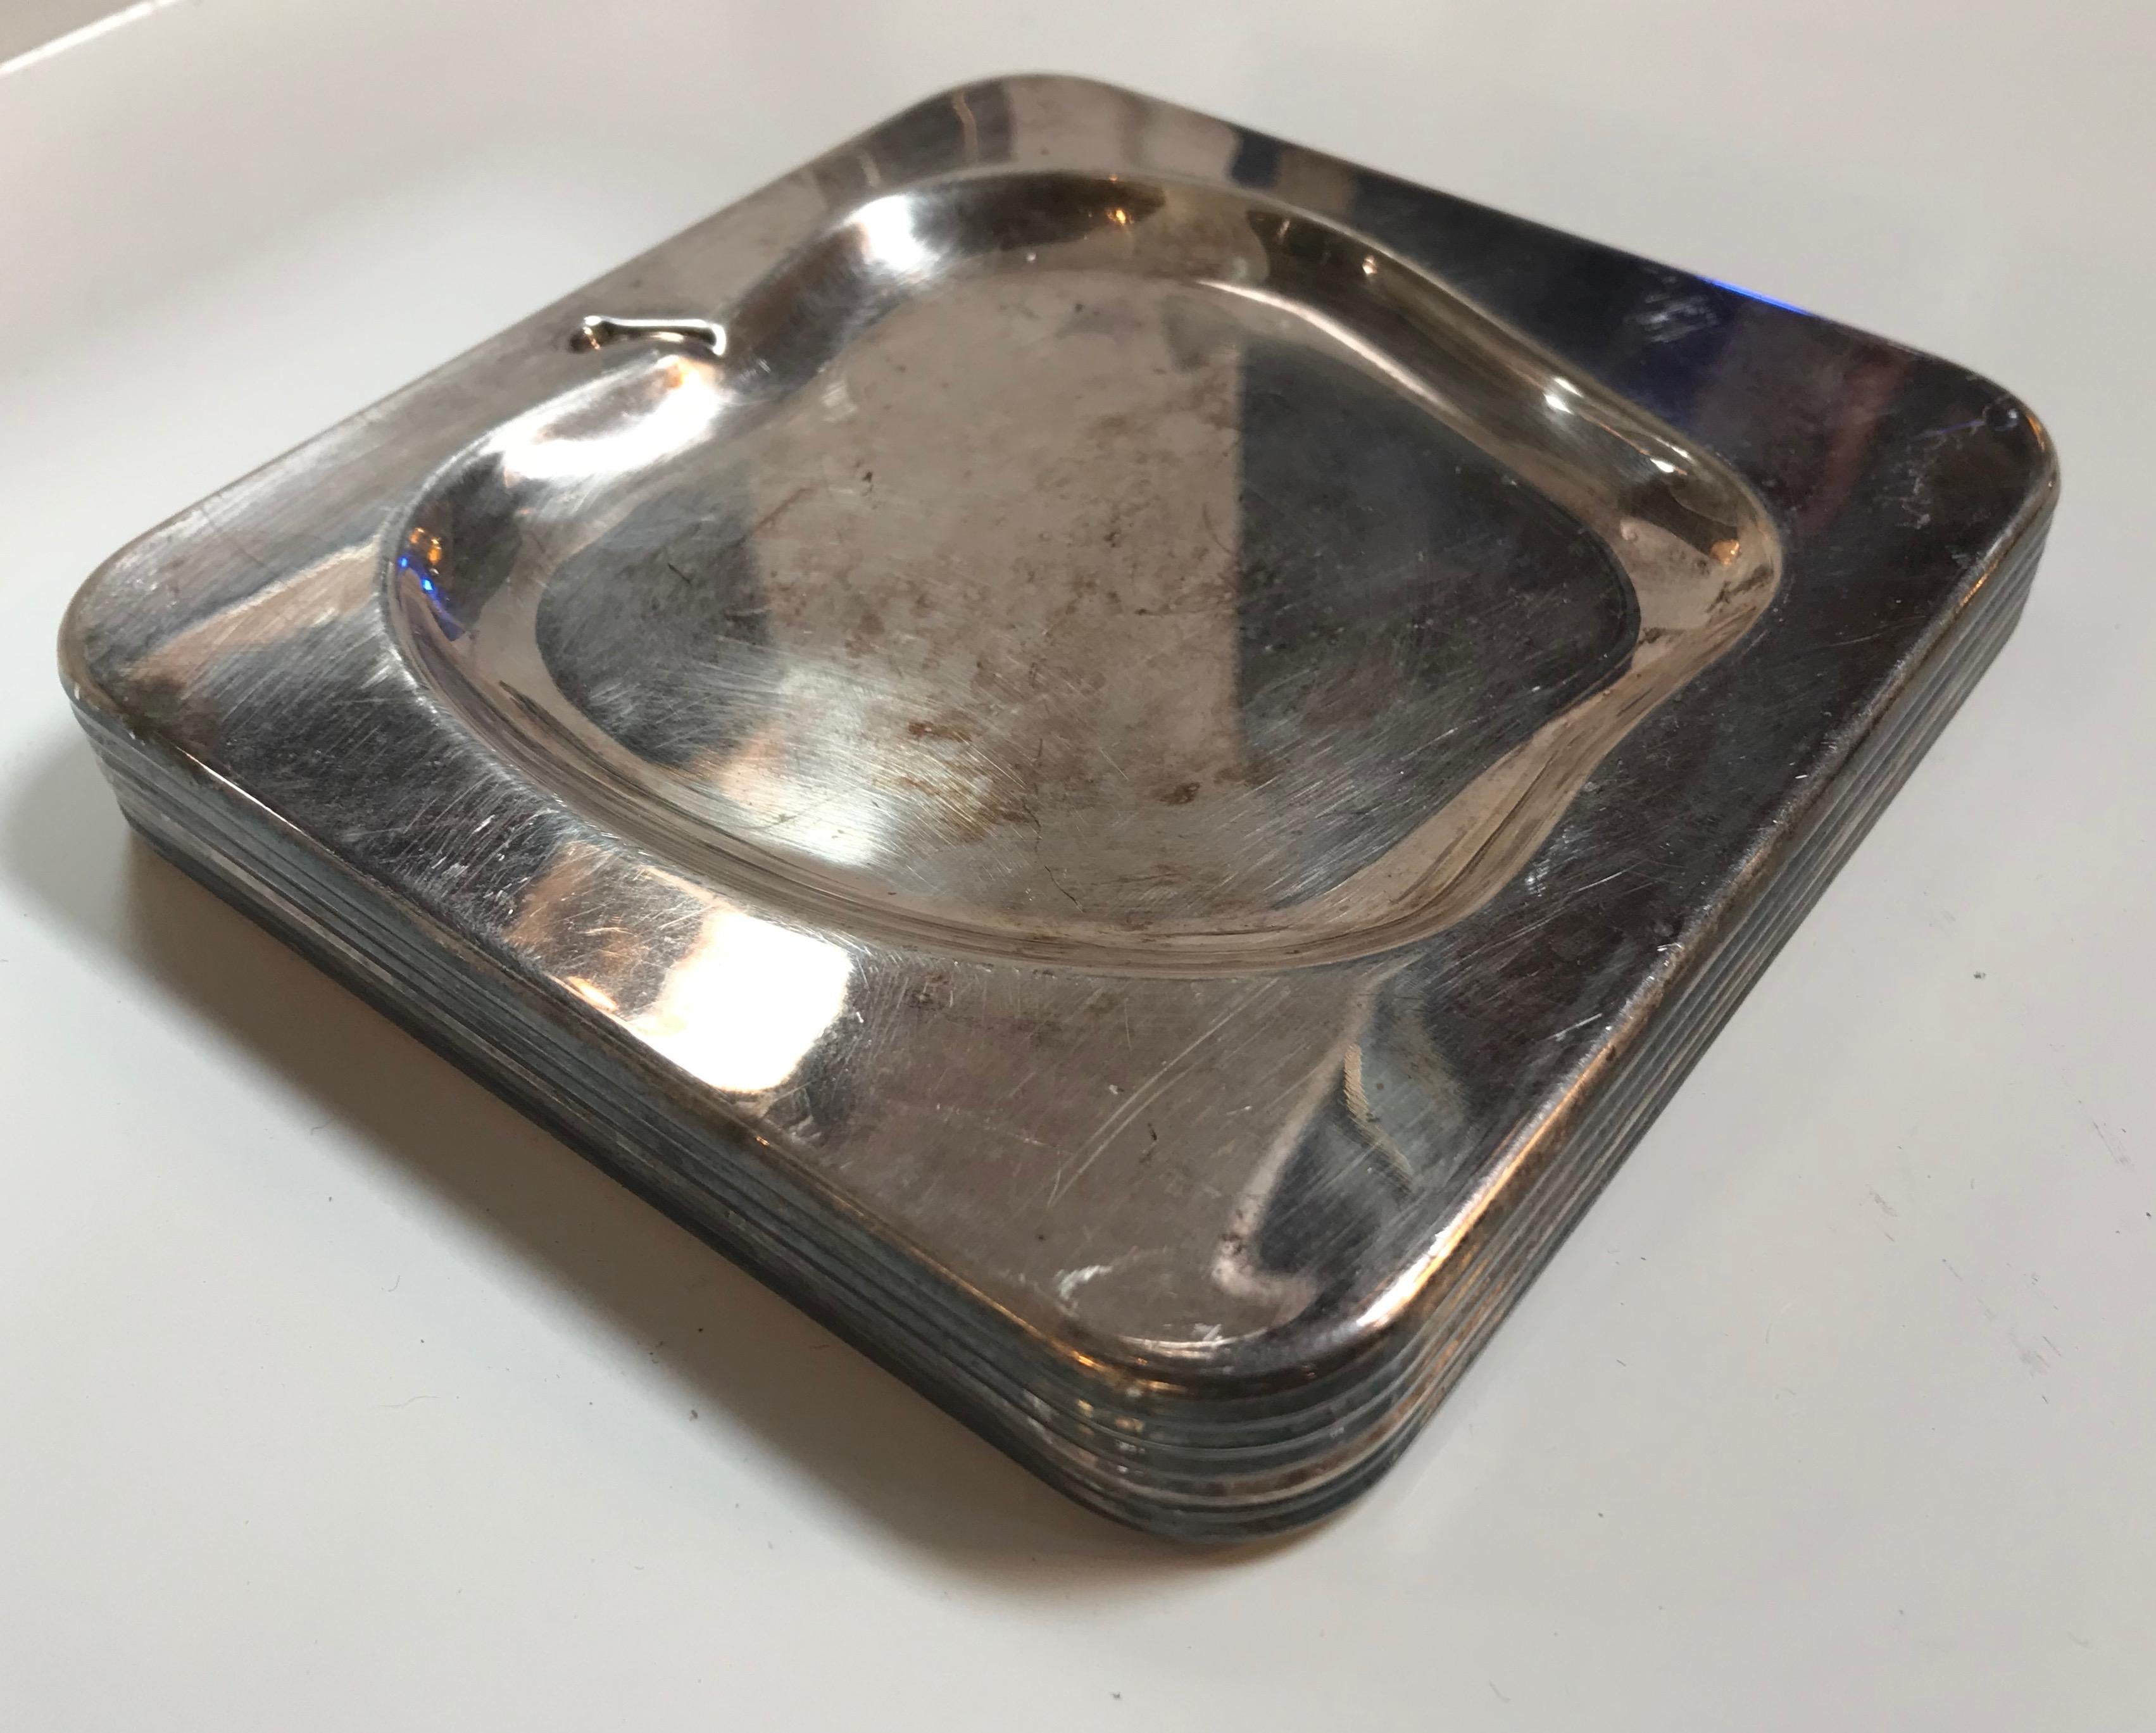 Set of 6 chrome square cocktail plates, Italy, 1970s
The 